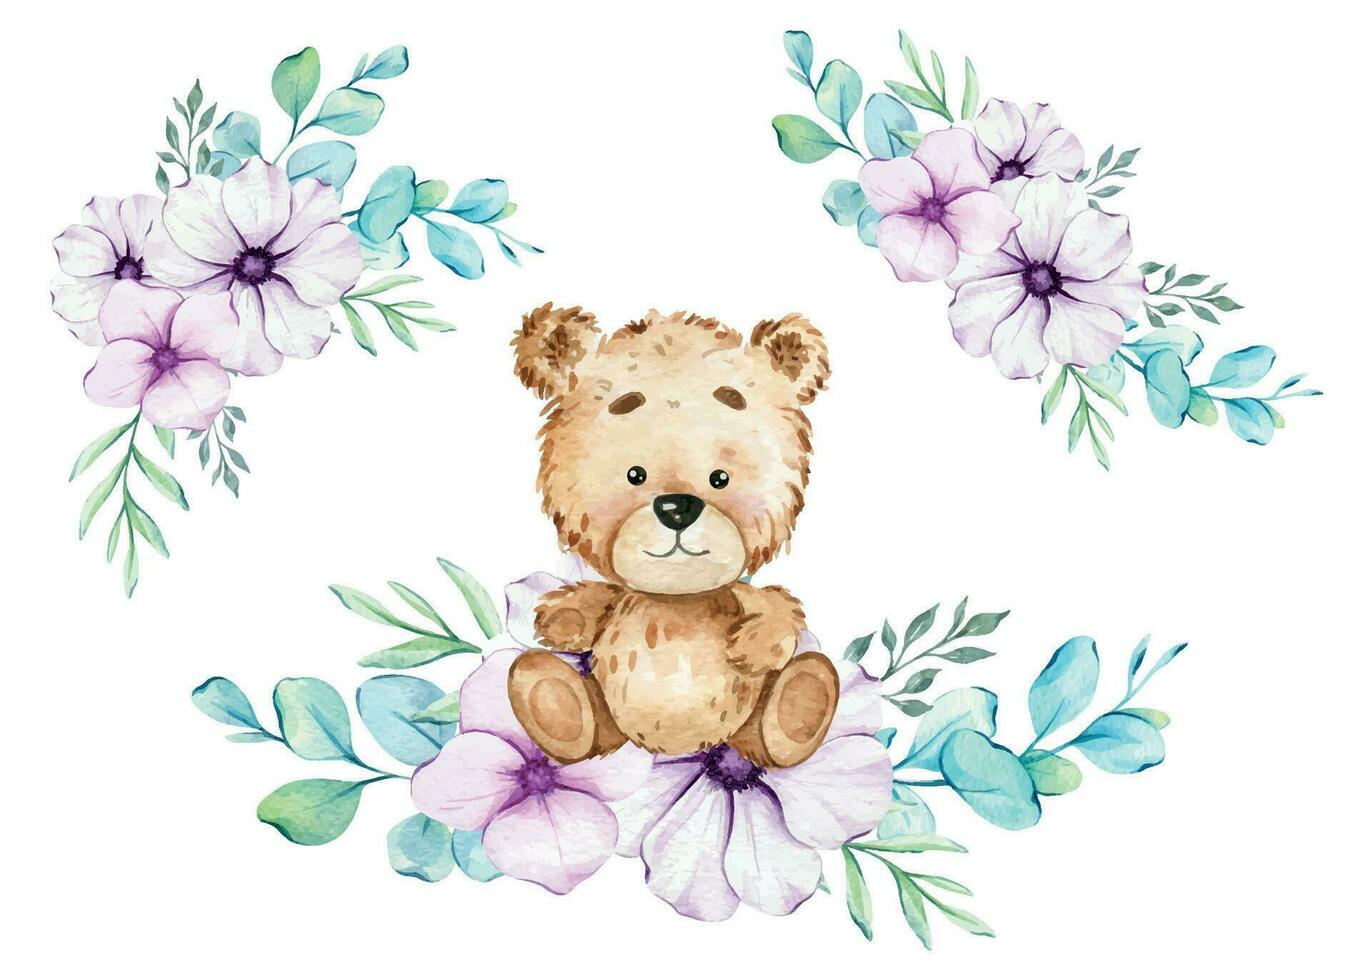 Cute Baby Bear Watercolor Illustration, Little Bear with balloons Isolated on white background. Hand Drawn Lovely Animal for nursery decor children illustration. Baby shower concept vector